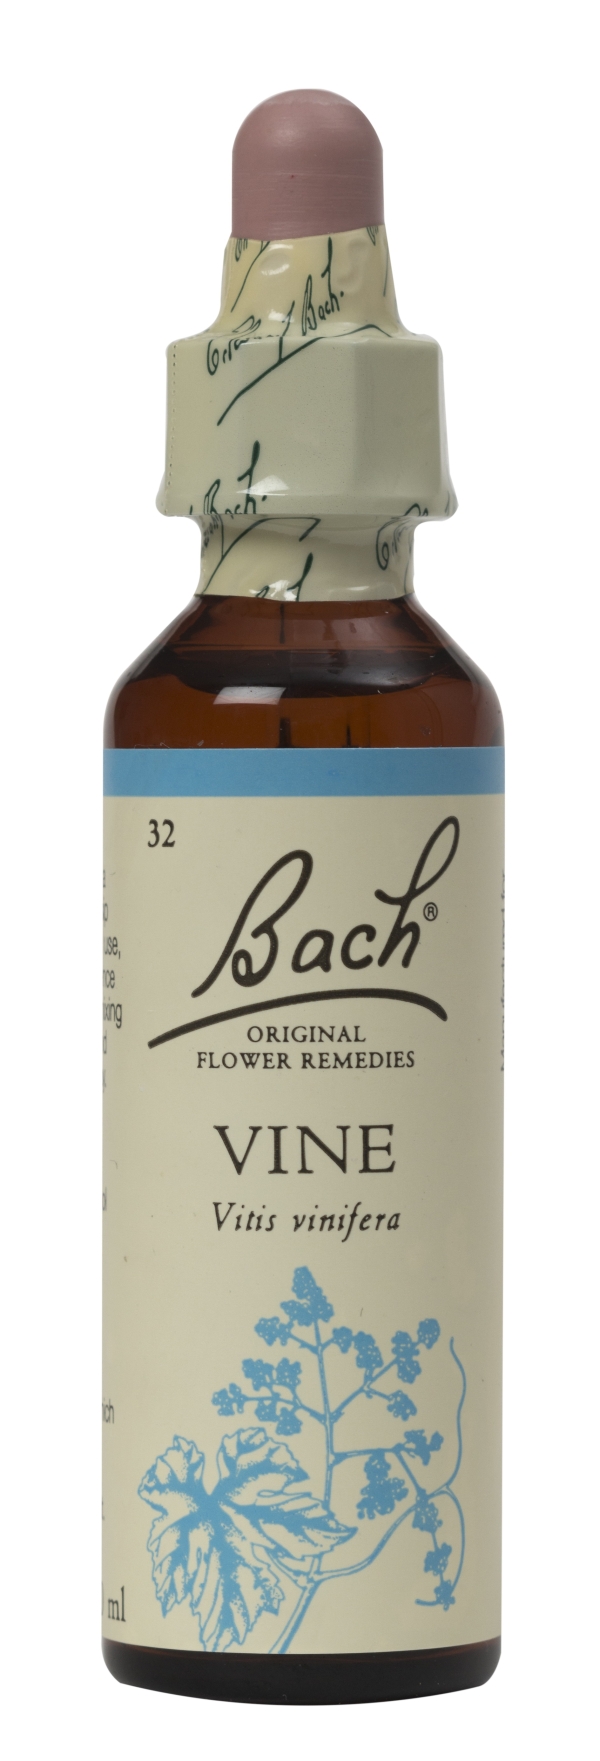 Nelson Bach Flower Remedies: Bach Vine Flower Remedy (20ml) available online here